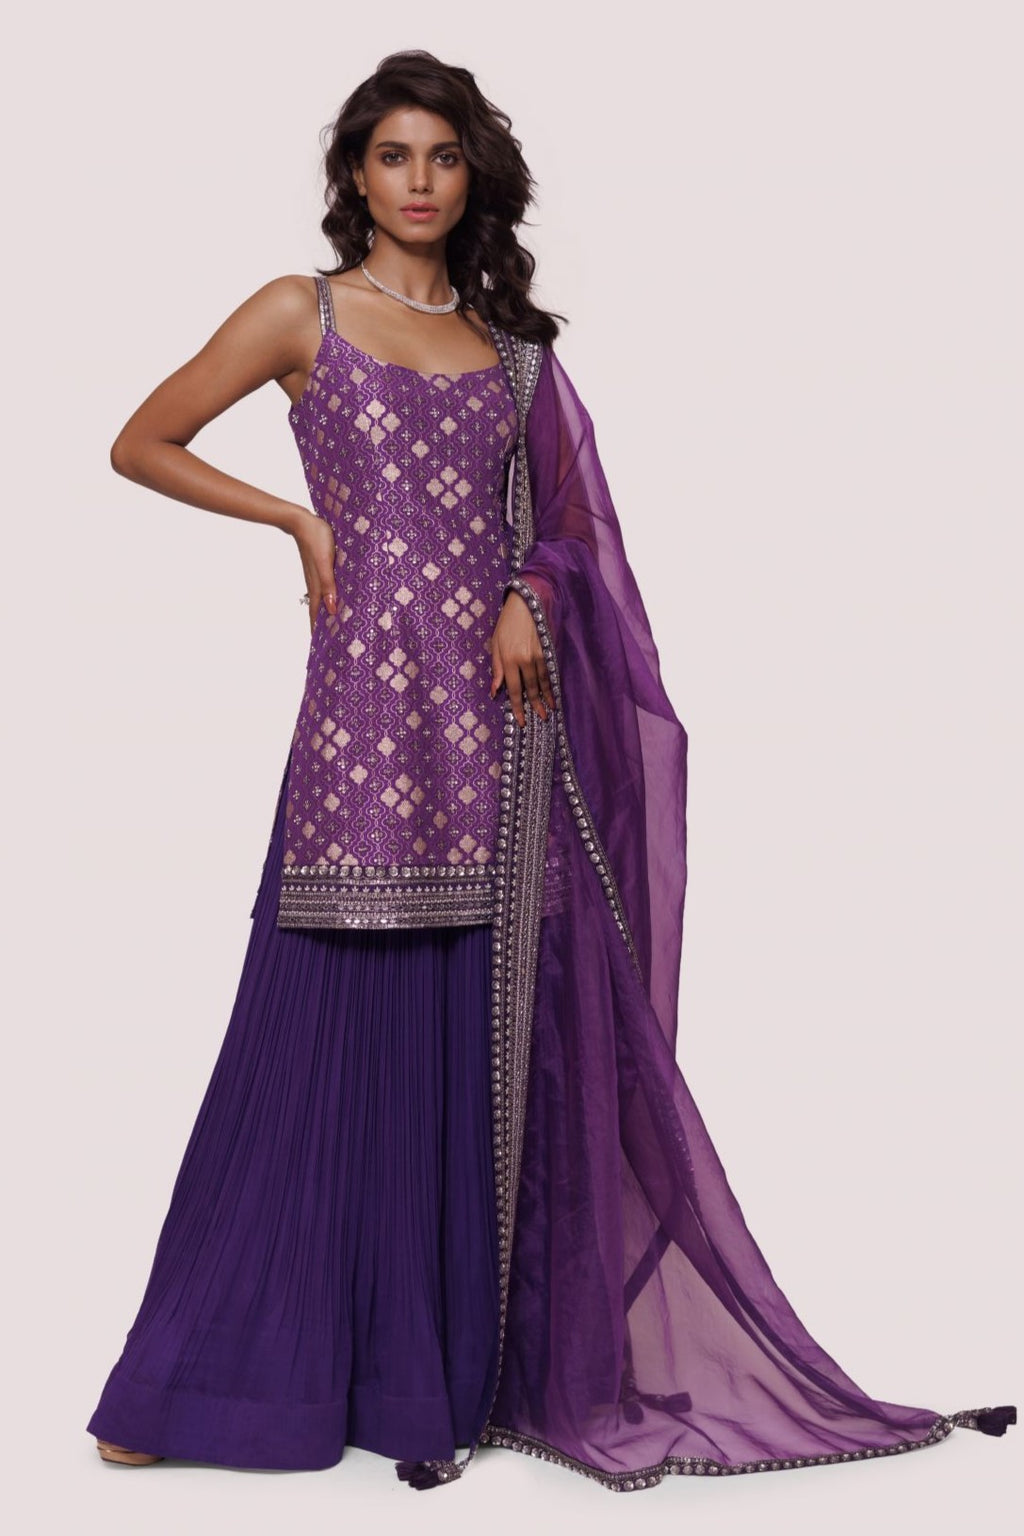 Buy a purple brocade kurta set with georgette sharara and narrow sleeves with sequin mirror embroidery. Dazzle on weddings and special occasions with exquisite Indian designer dresses, sharara suits, Anarkali suits, and wedding lehengas from Pure Elegance Indian fashion store in the USA.